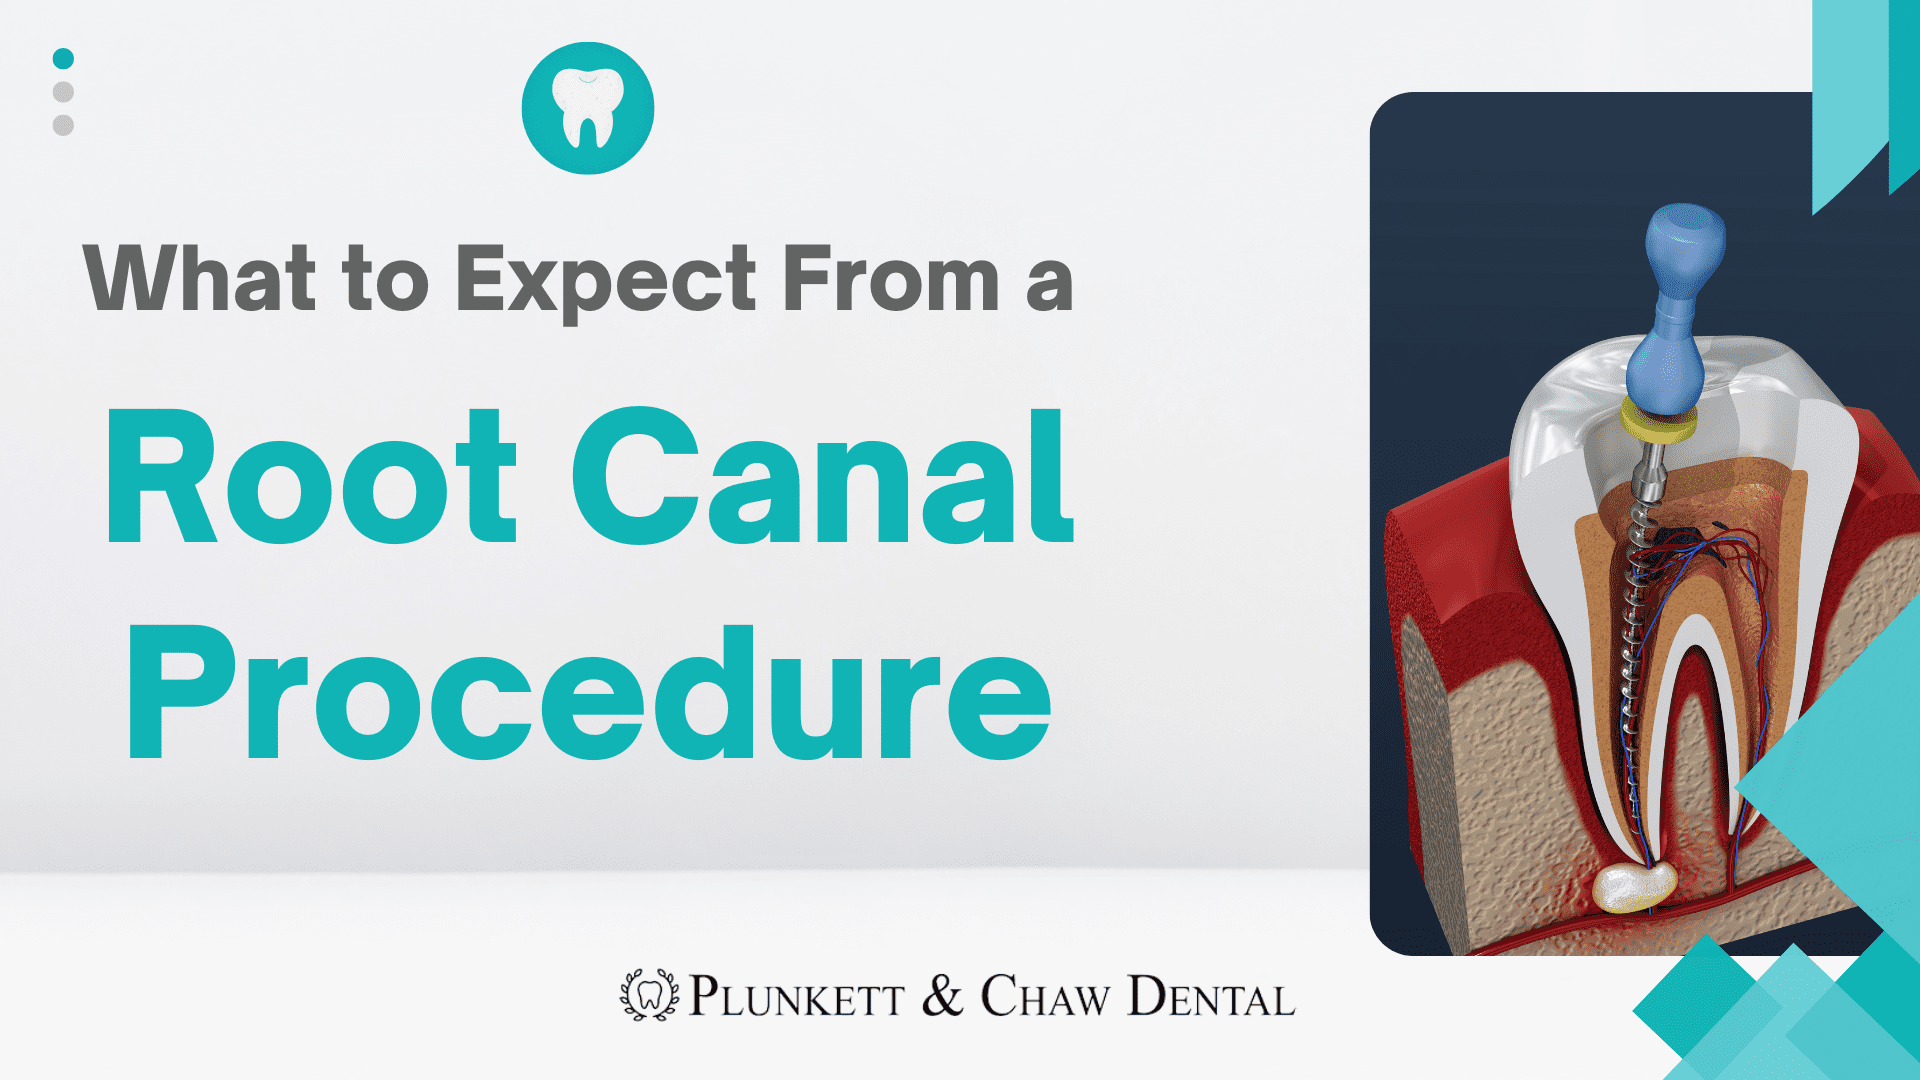 What to Expect From a Root Canal Procedure